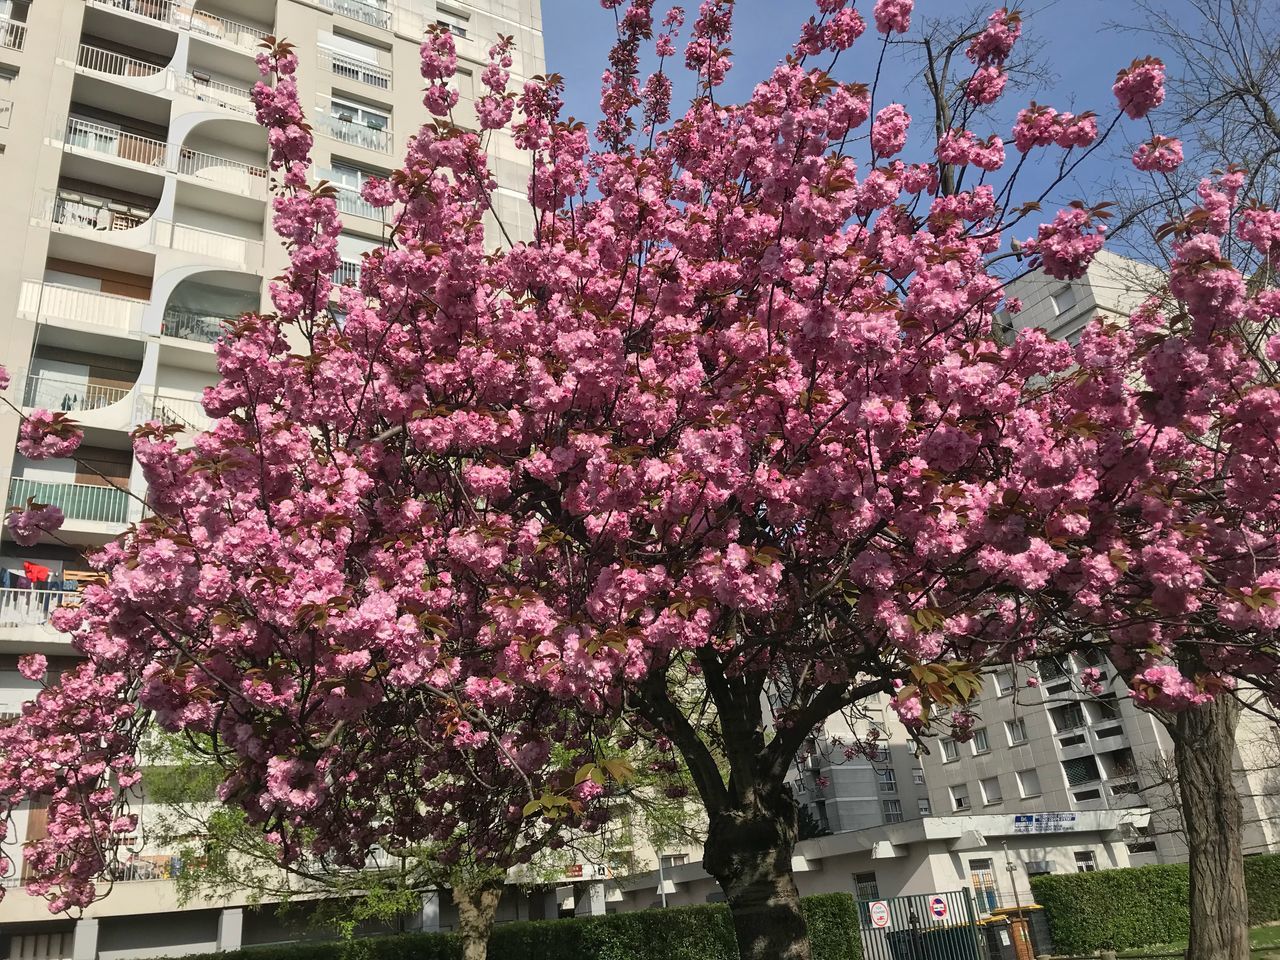 flower, flowering plant, plant, pink color, building exterior, growth, architecture, built structure, freshness, tree, nature, city, fragility, blossom, day, building, beauty in nature, vulnerability, springtime, outdoors, no people, cherry blossom, cherry tree